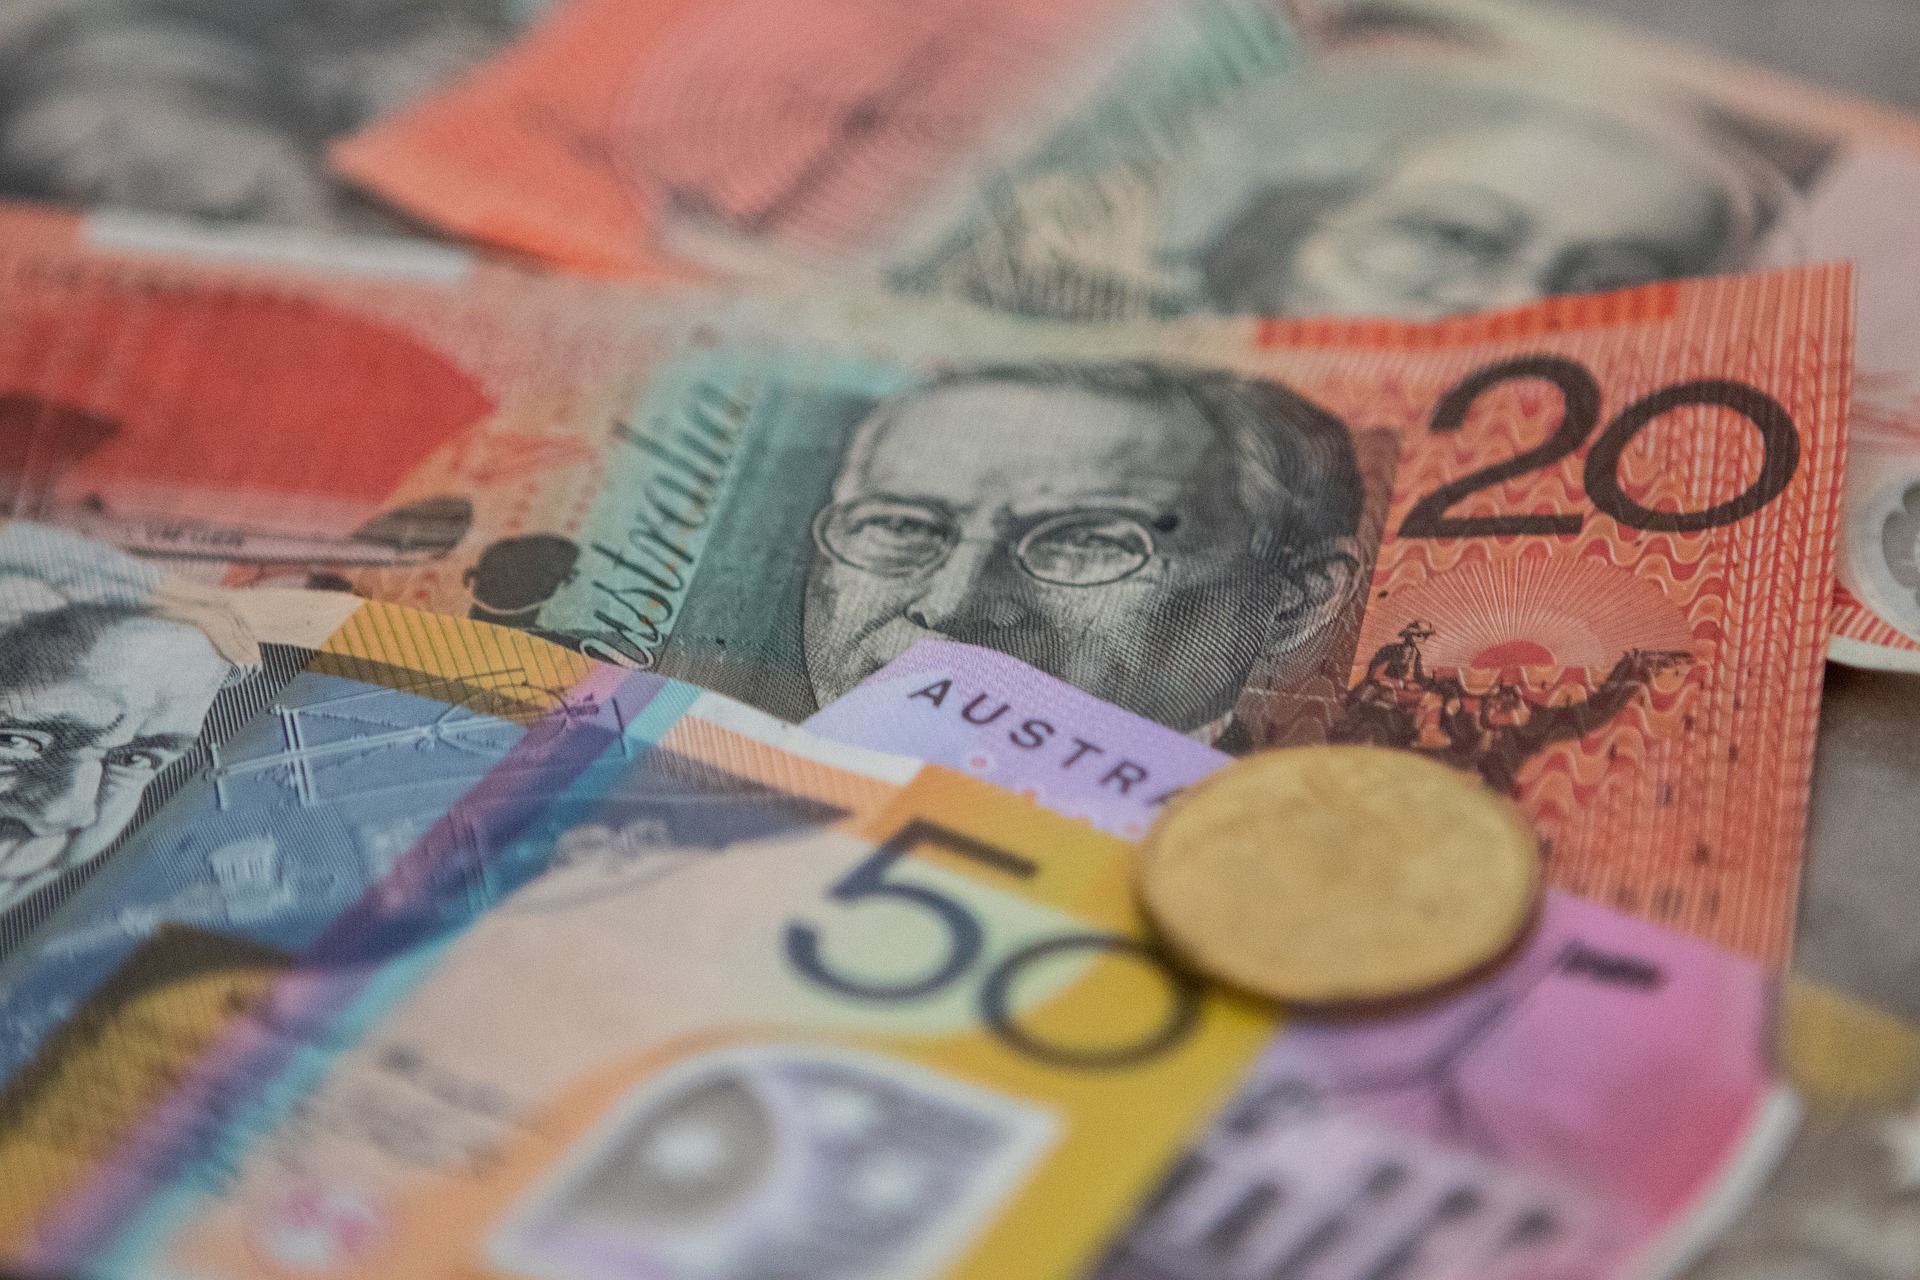 No questions asked: money laundering thrives in Australia because of professionals willing to facilitate it